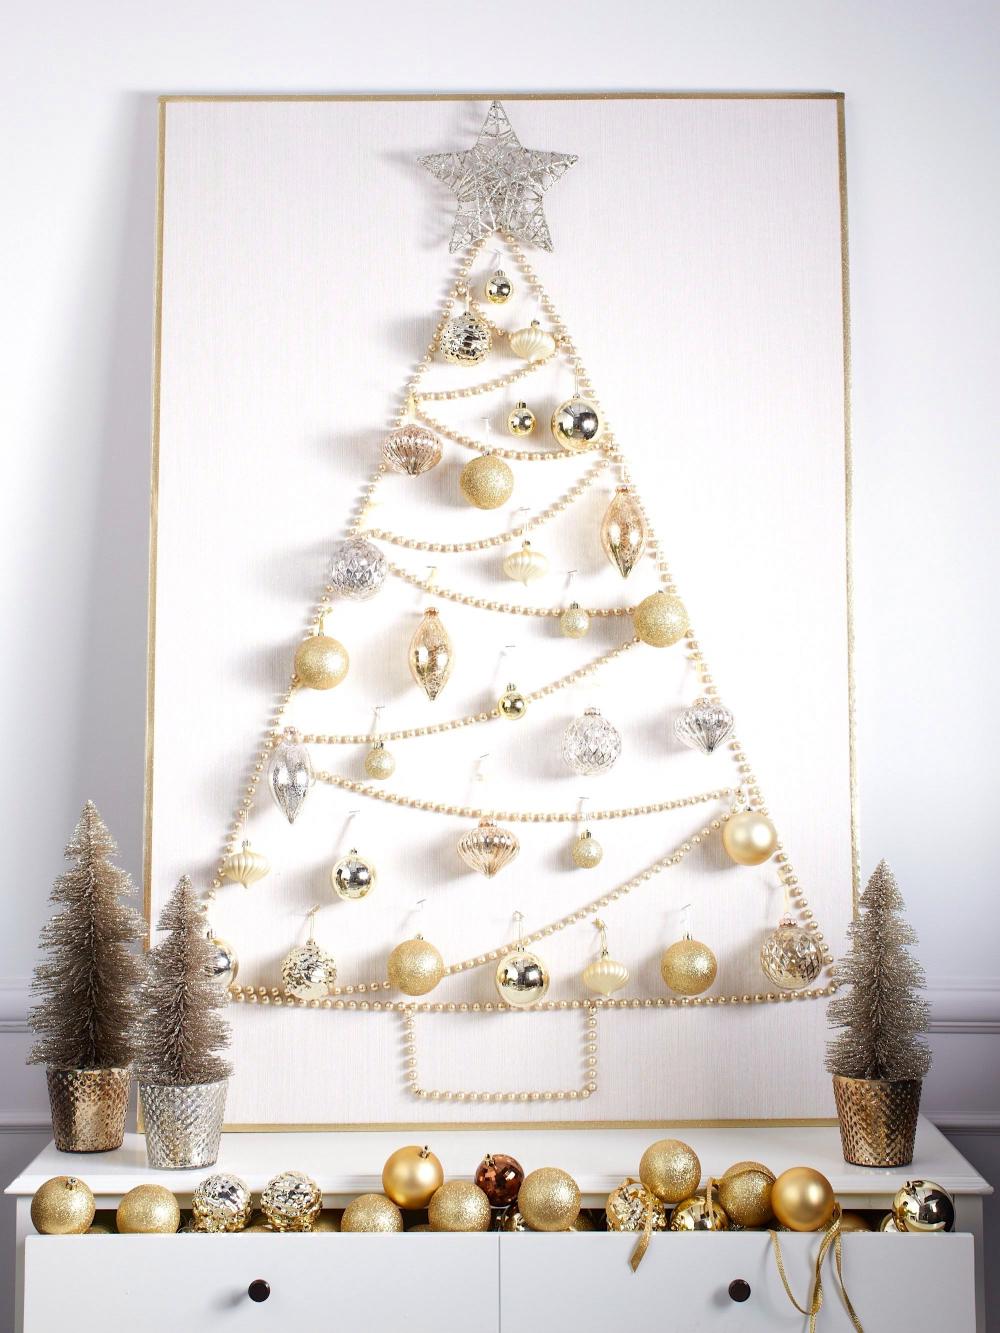 Simple and great ideas for Christmas decorations